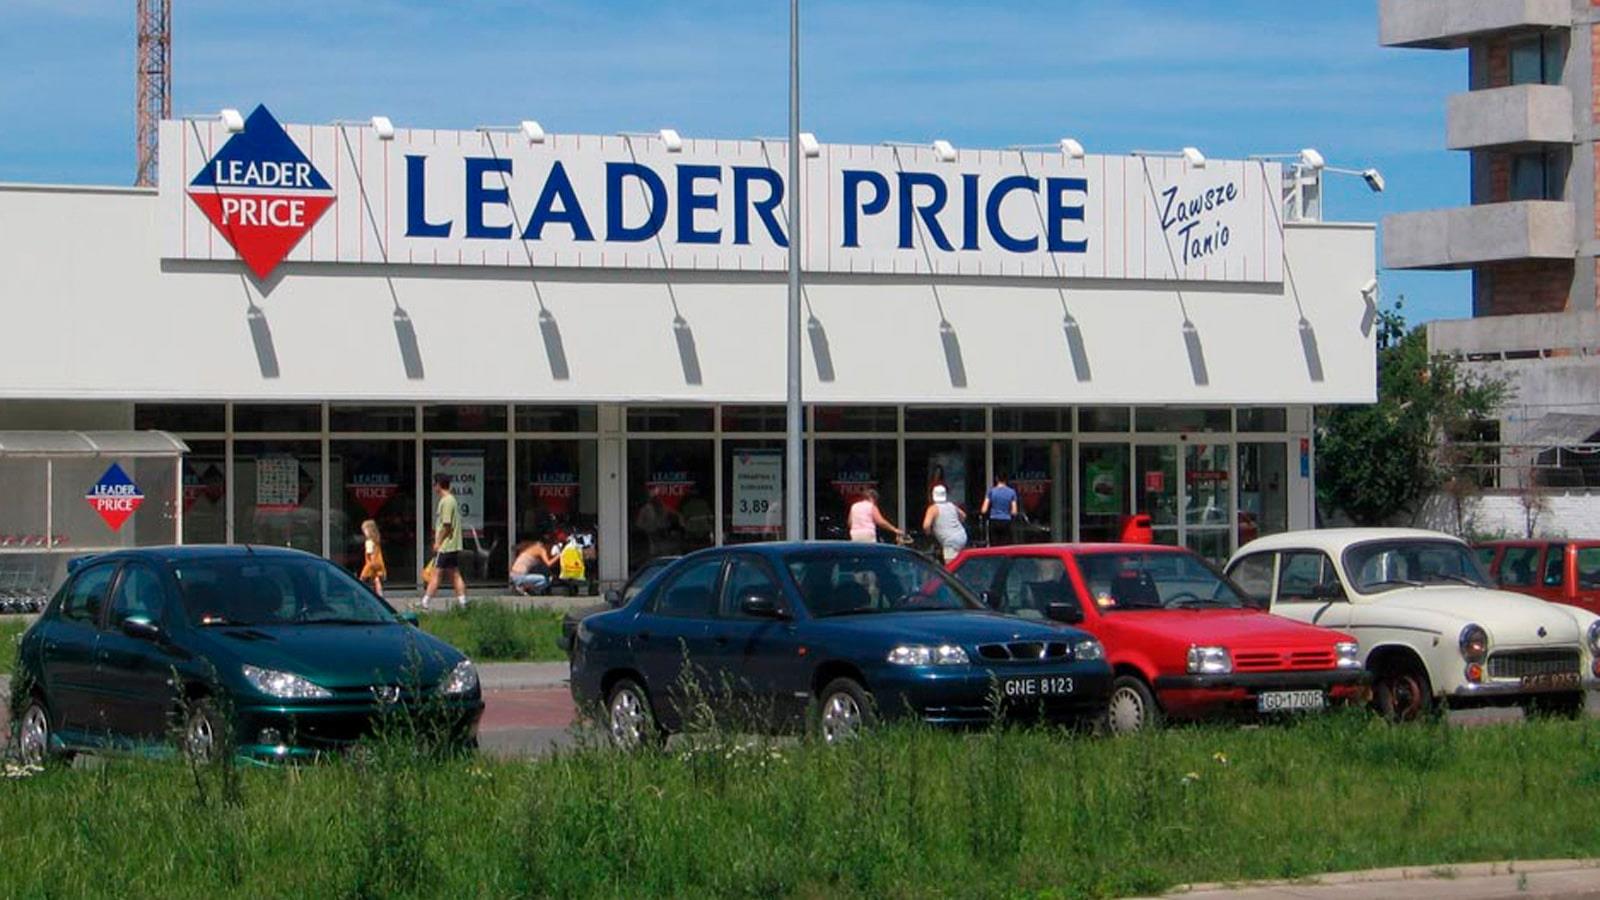 Four private cars parked in front of Leader Price supermarket